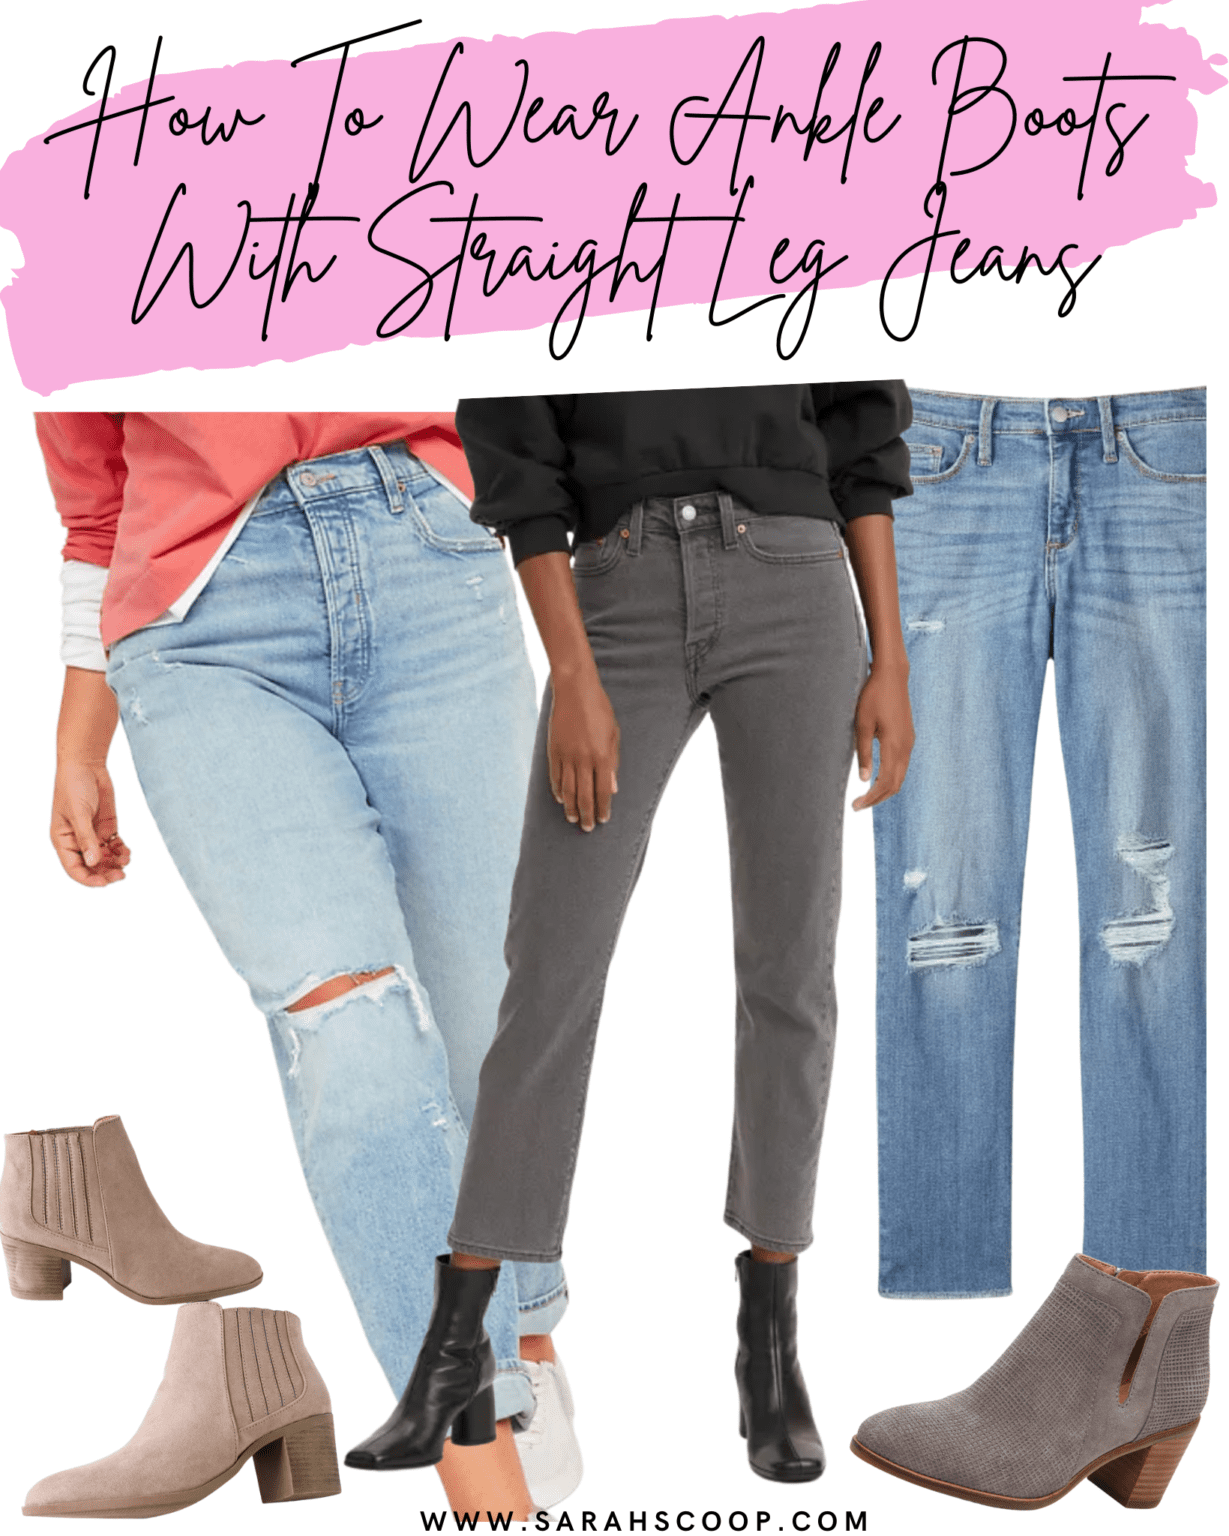 How To Wear Ankle Boots With Straight Leg Jeans Sarah Scoop